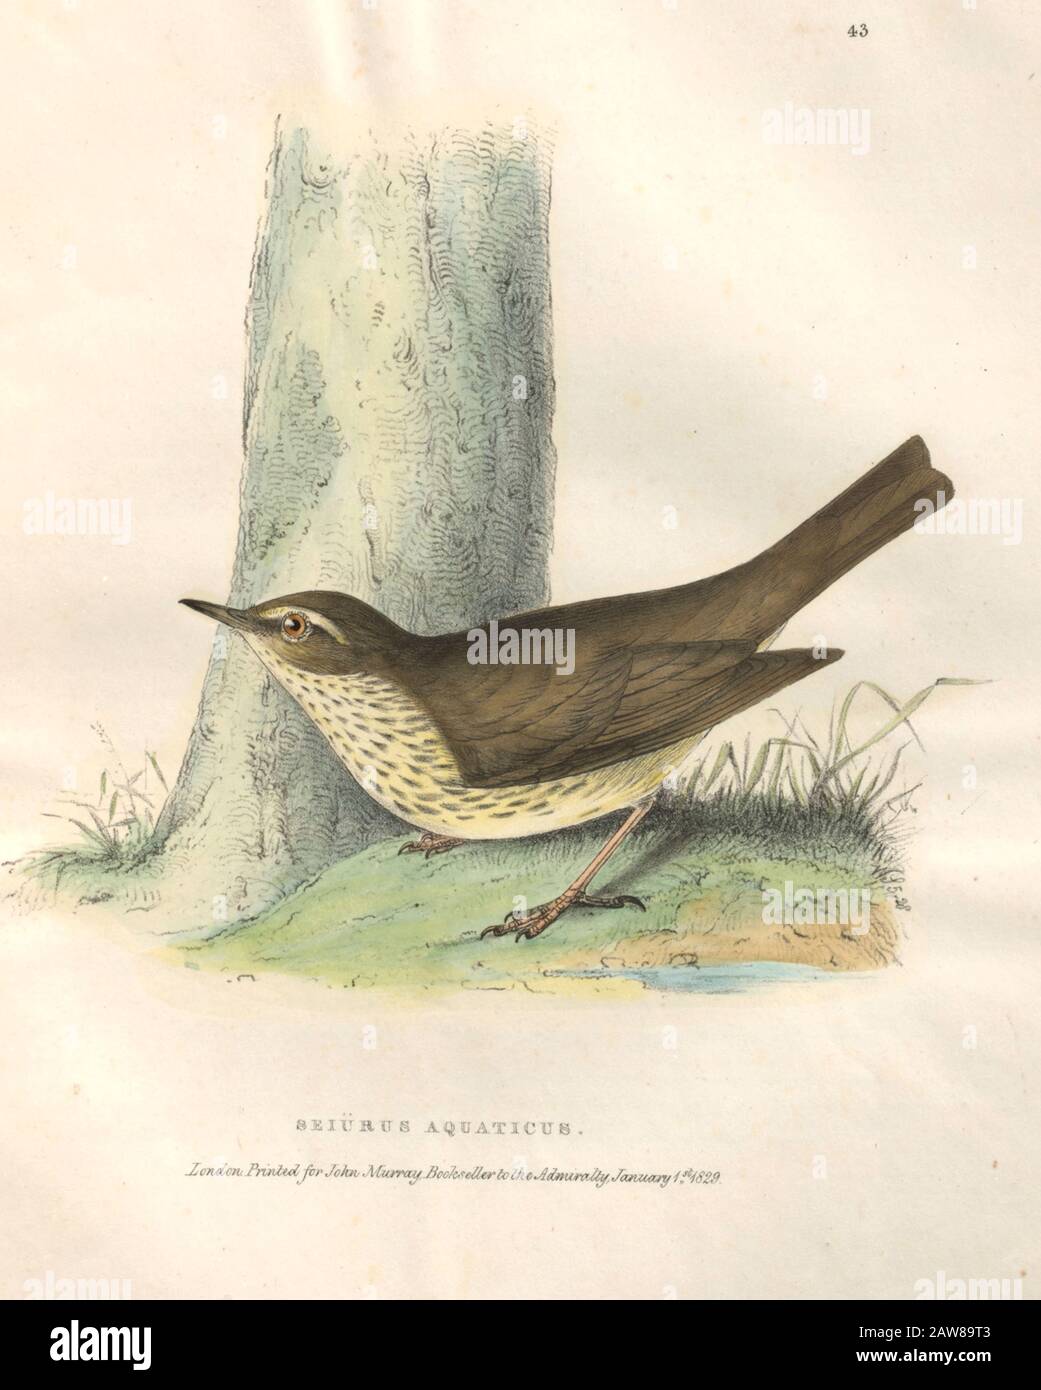 Northern Waterthrush (Seiurus aquaticus), color plate of North American birds from Fauna boreali-americana; or, The zoology of the northern parts of British America, containing descriptions of the objects of natural history collected on the late northern land expeditions under command of Capt. Sir John Franklin by Richardson, John, Sir, 1787-1865 Published 1829 Stock Photo